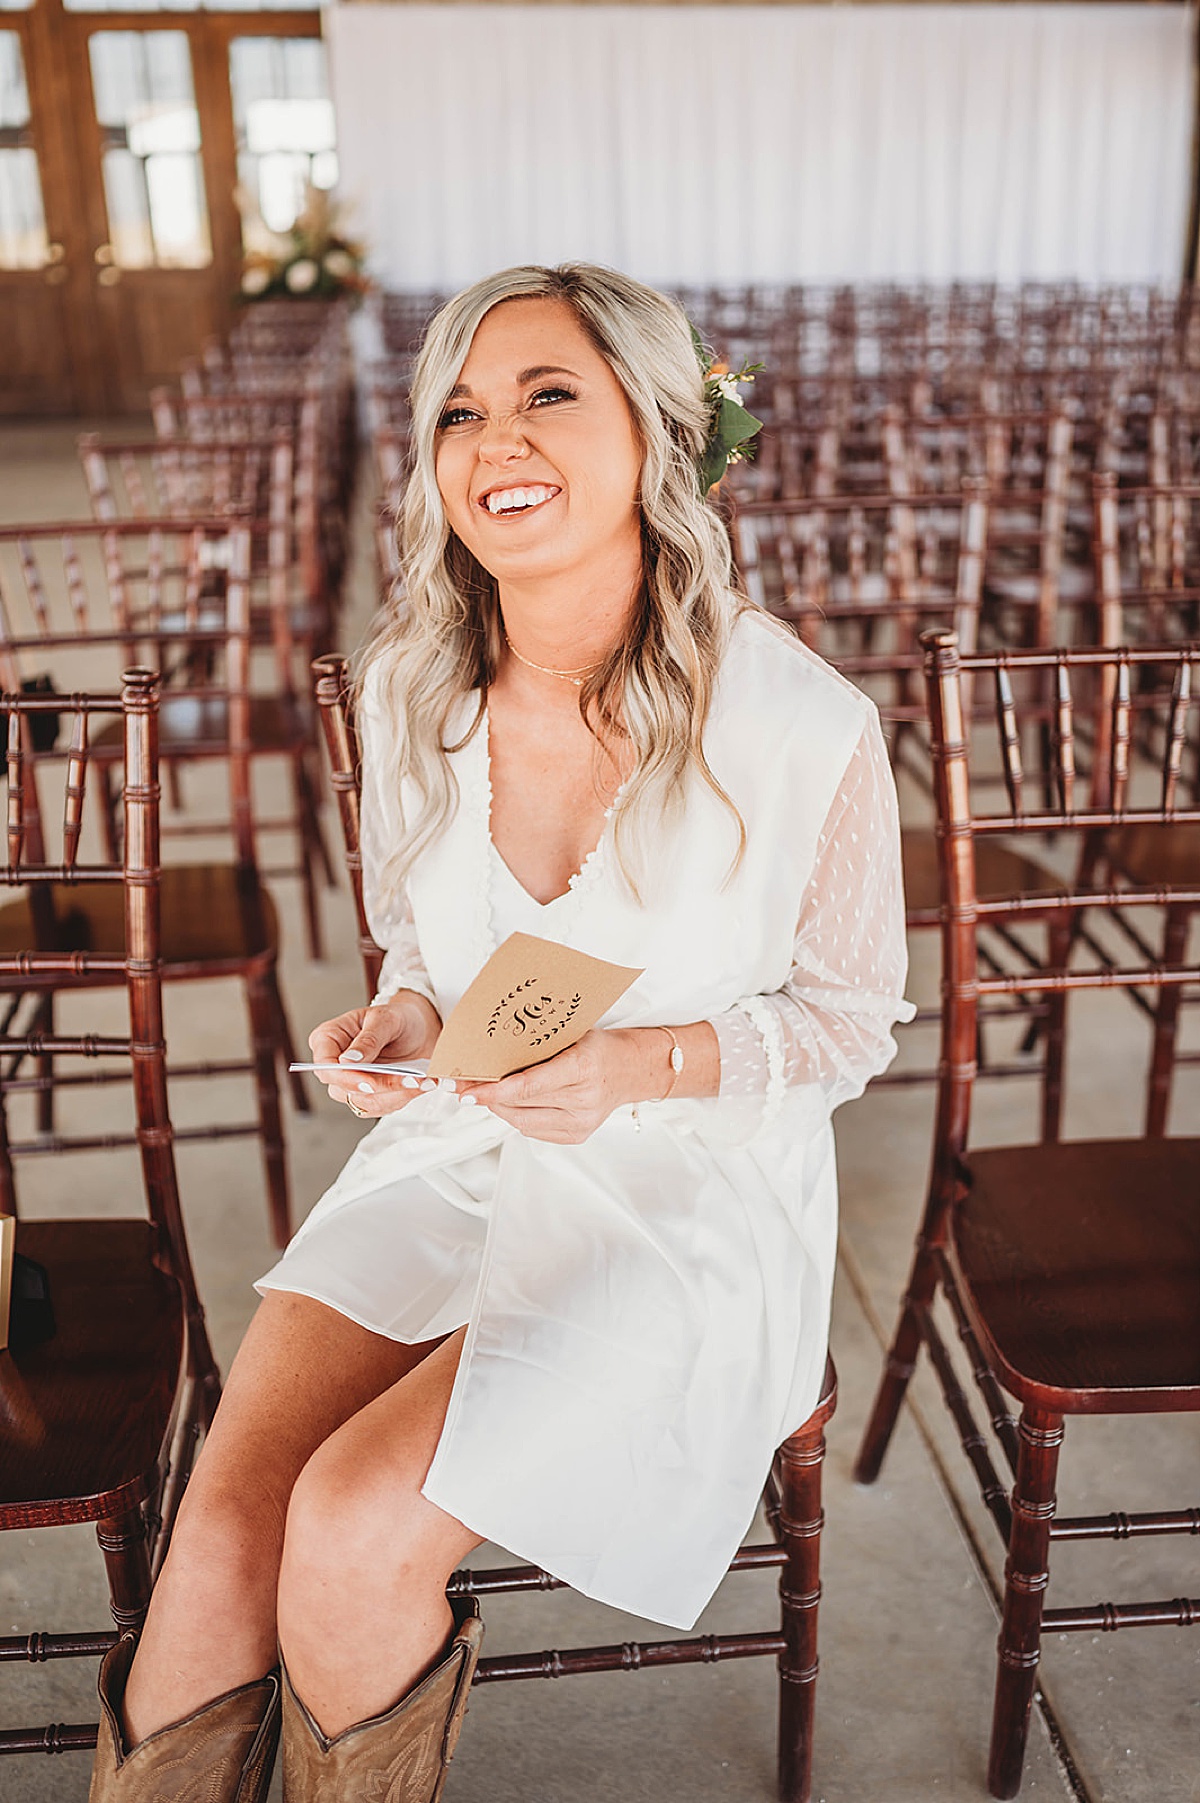 Brie smiles as she reads the groom's vows while getting ready for boho prairie wedding